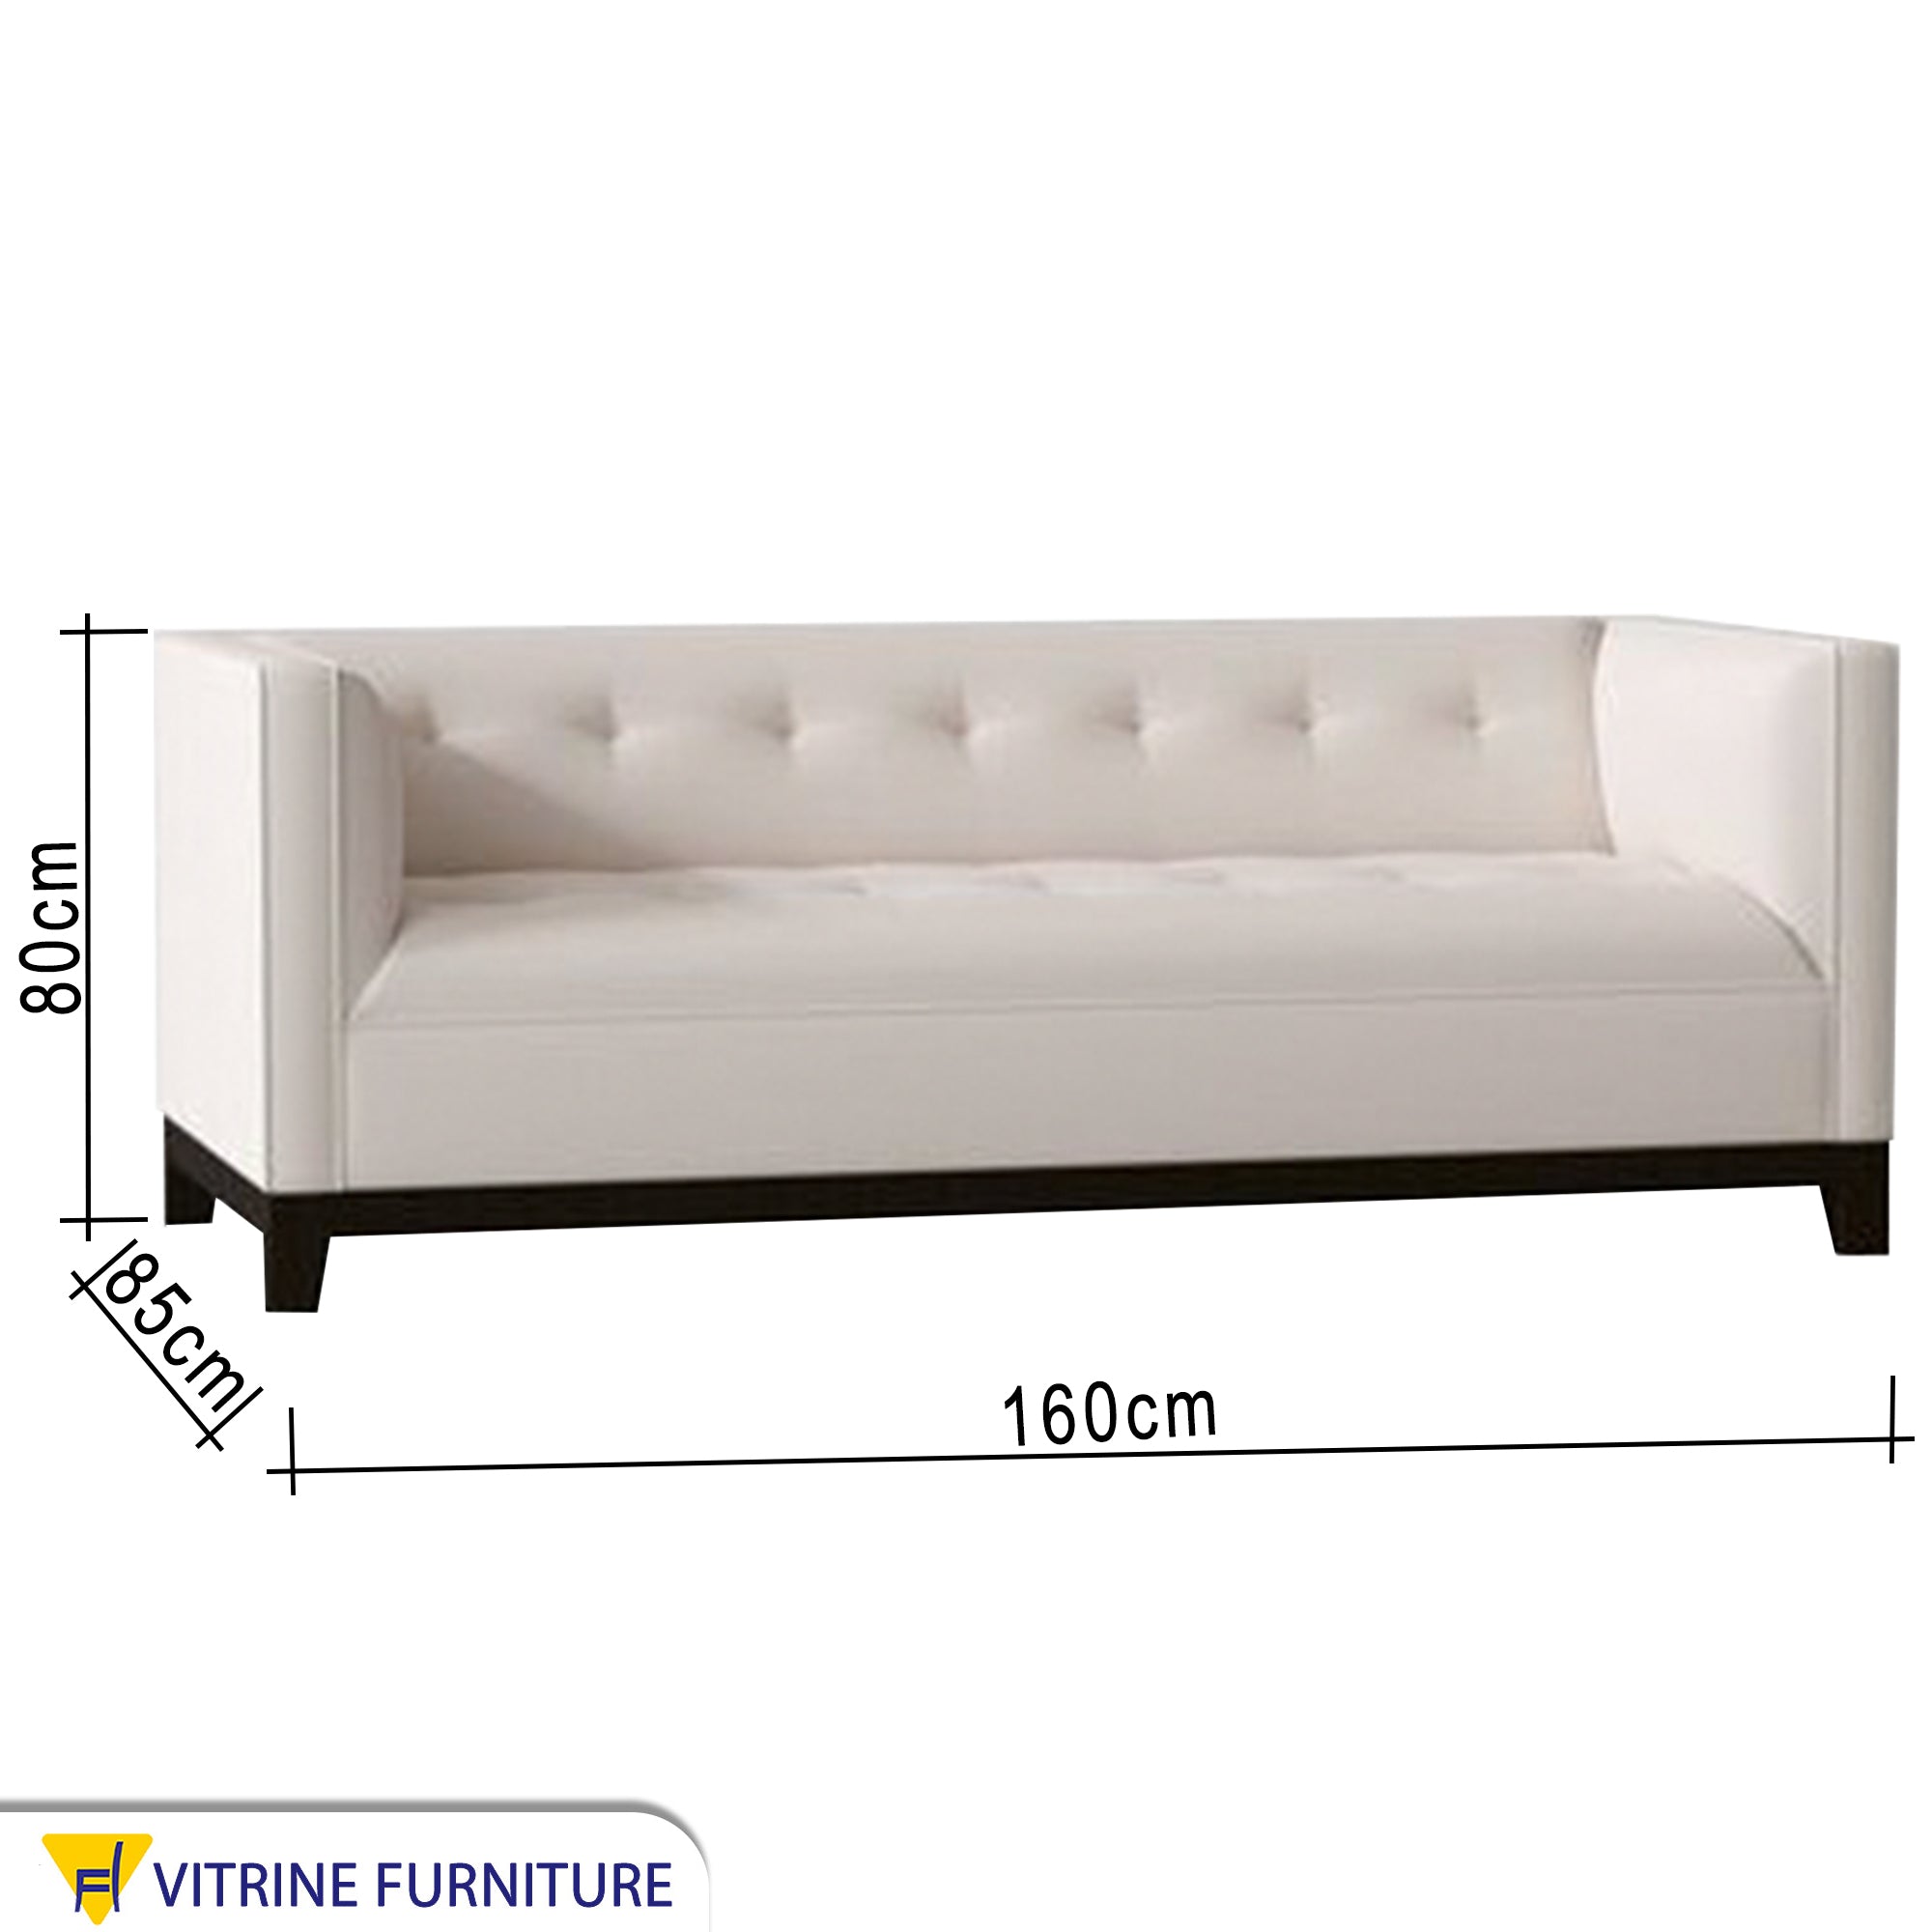 White sofa and black wooden legs